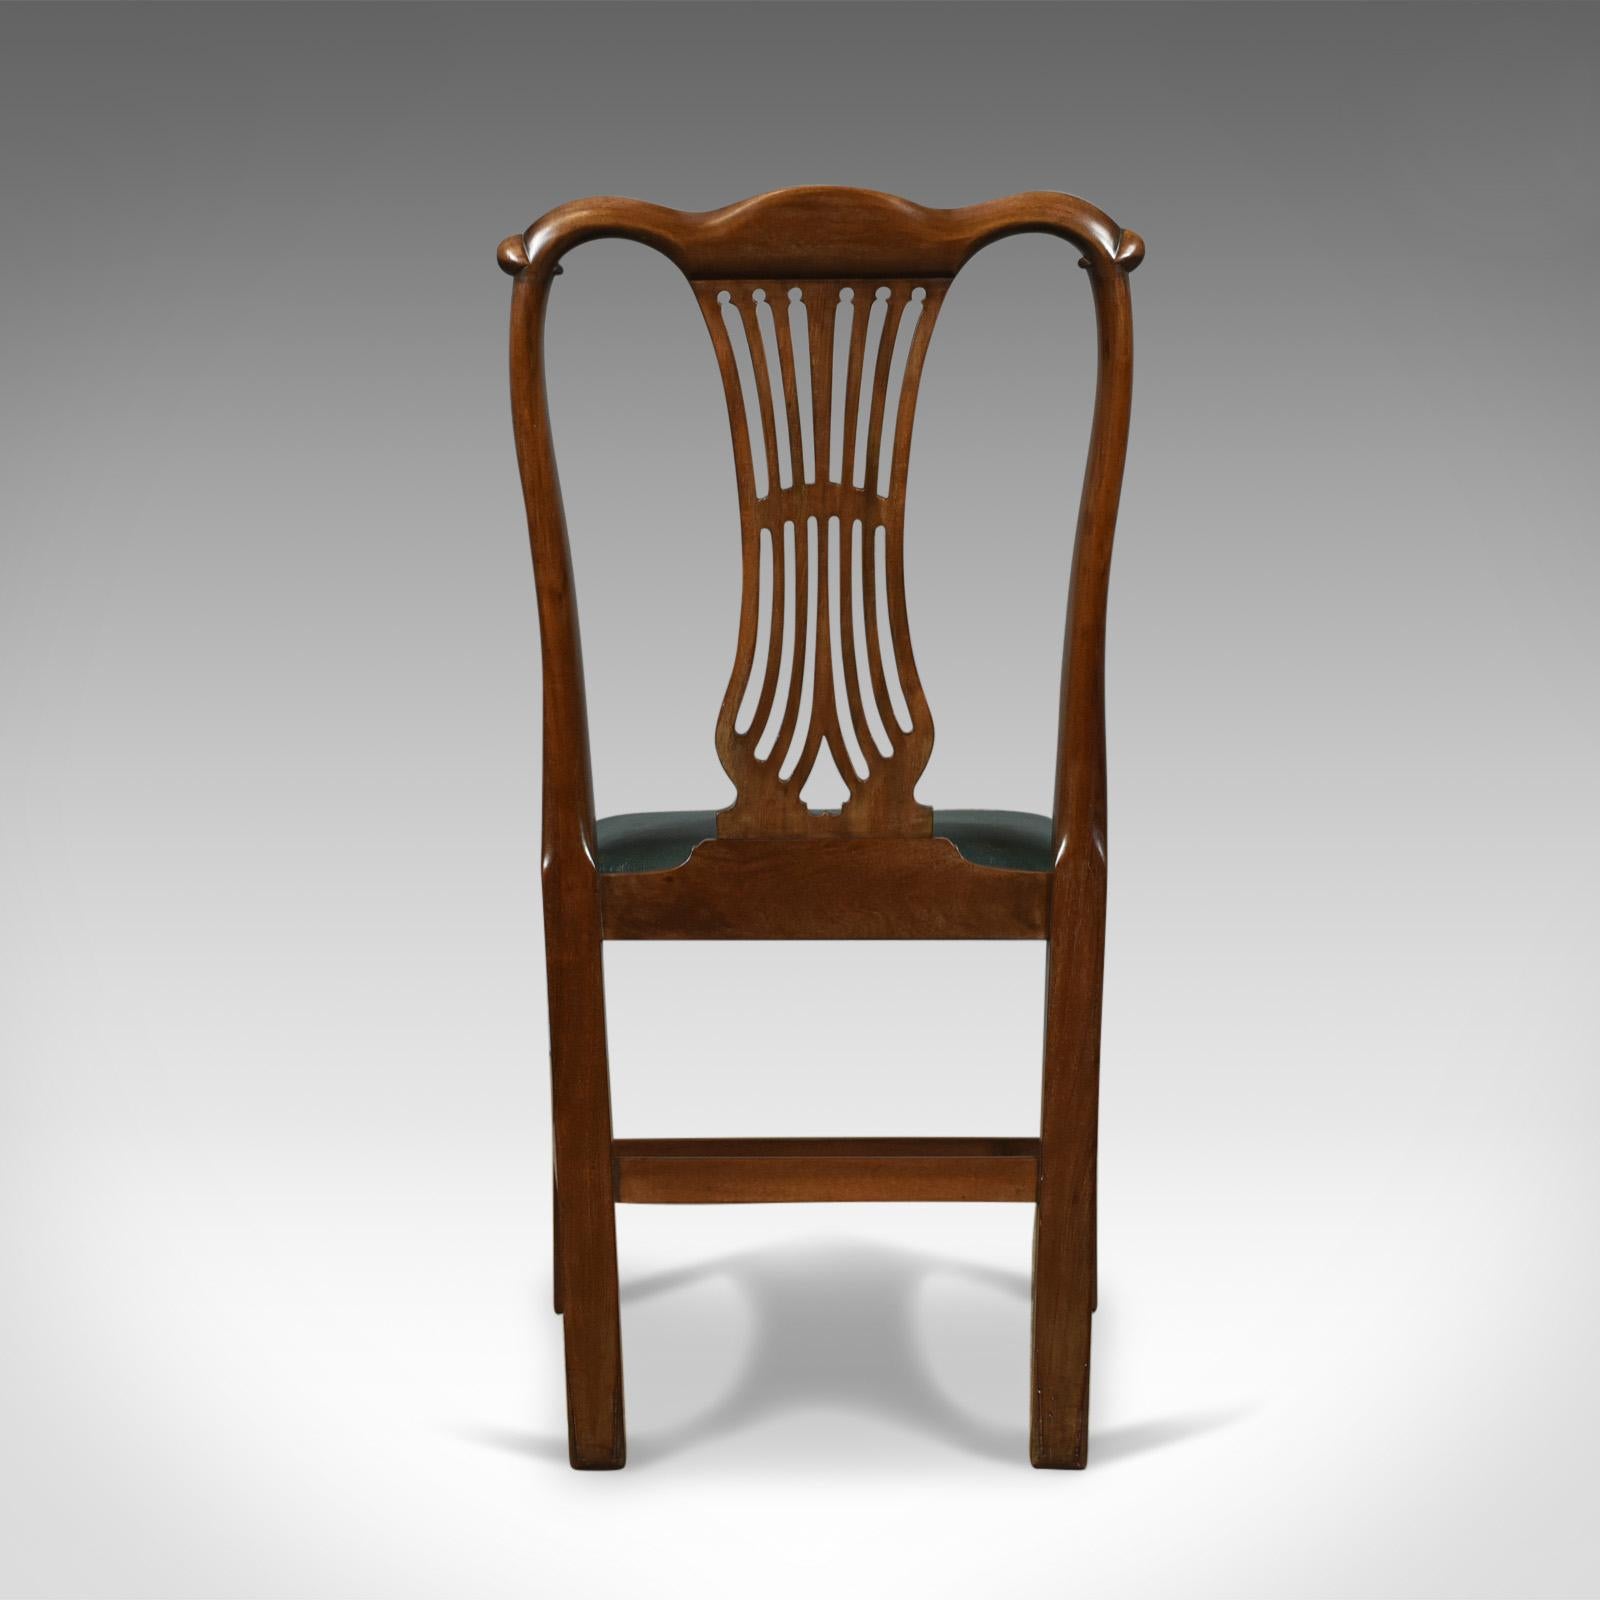 19th Century Set of Six Dining Chairs, English, Hepplewhite Revival, Victorian, circa 1880